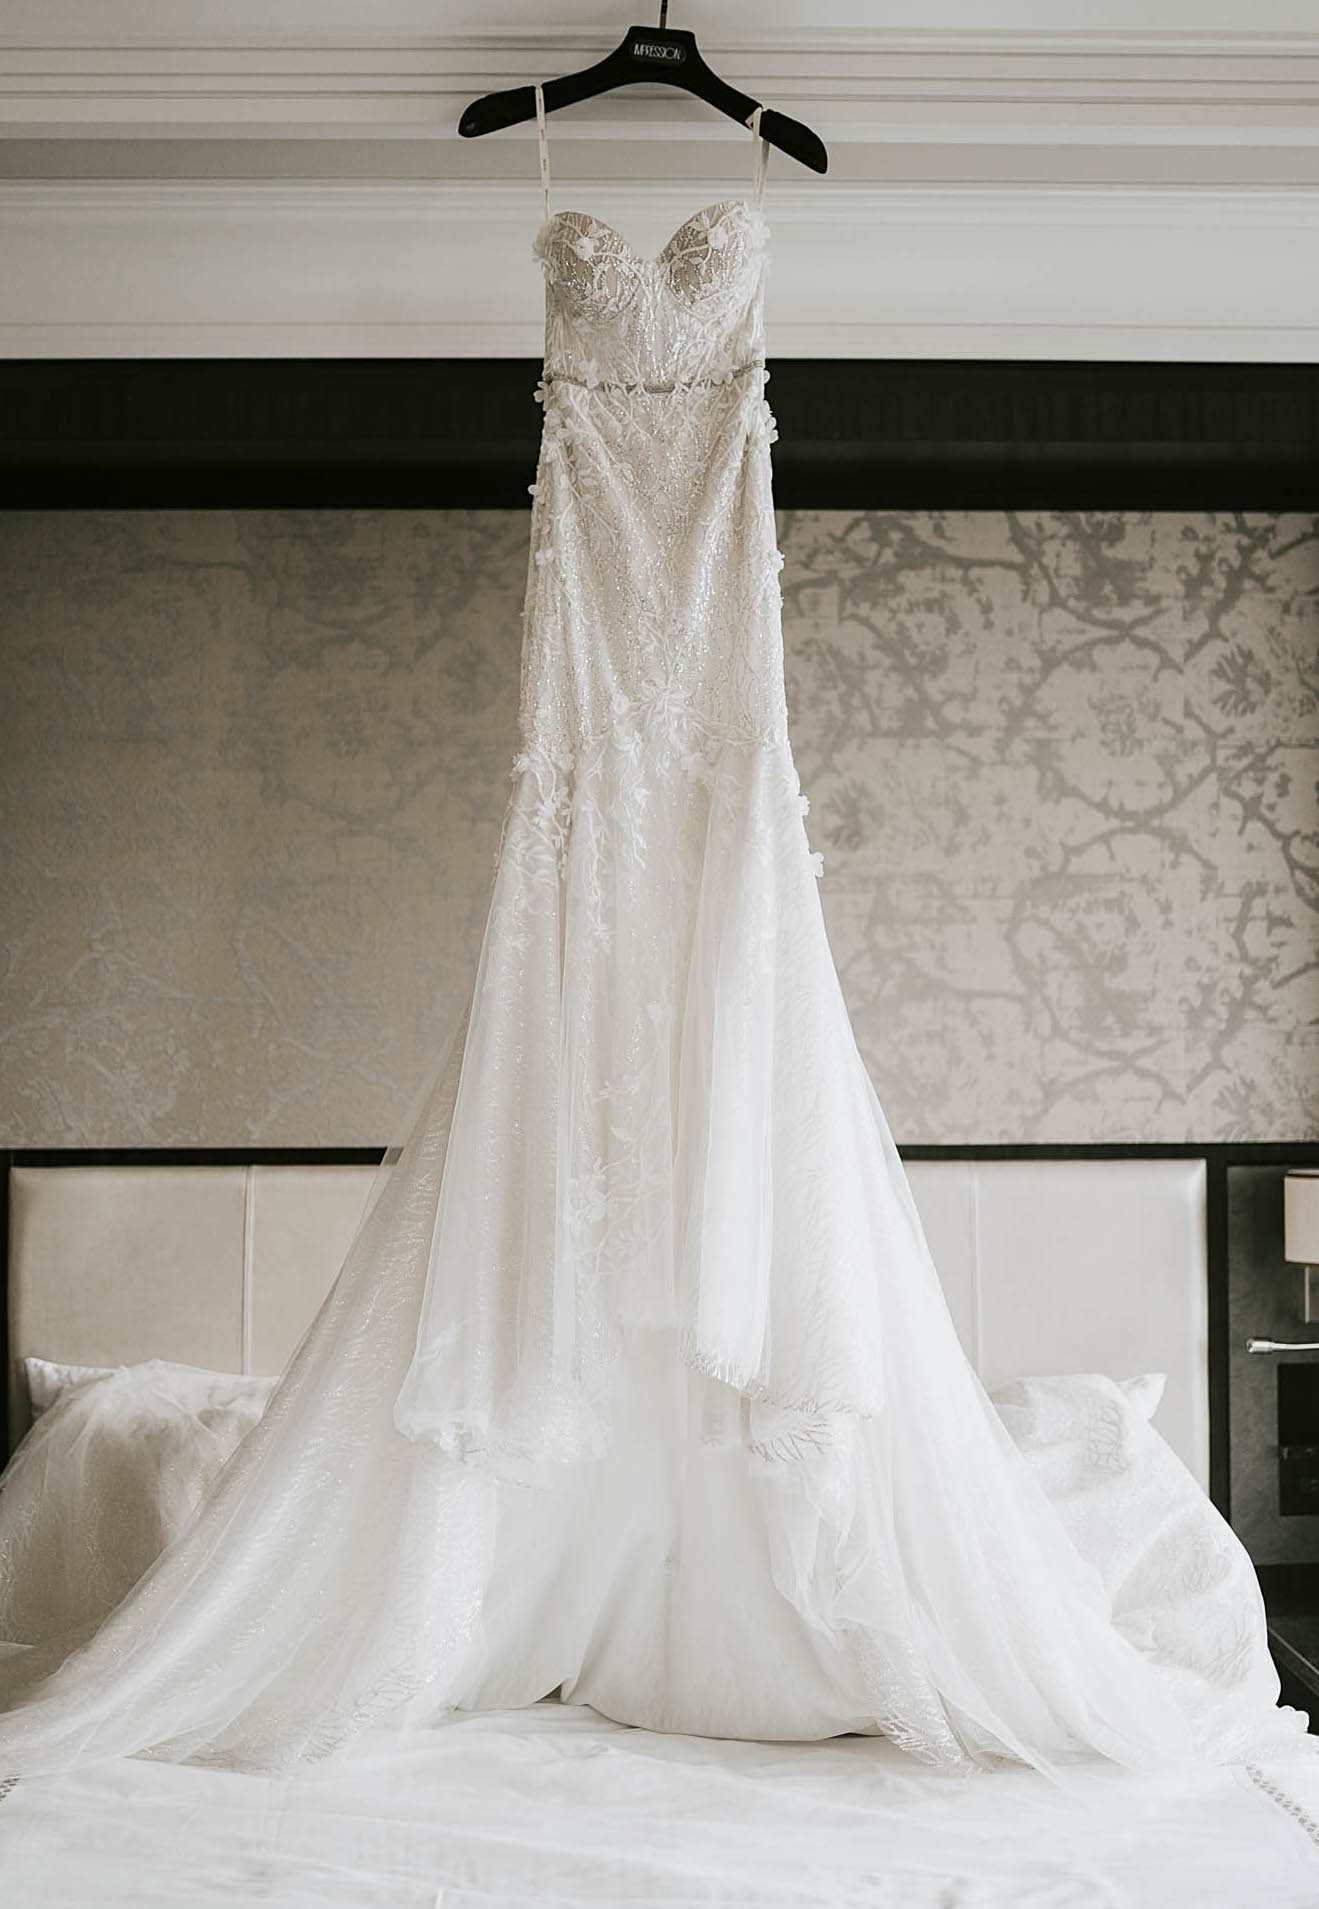 A bride's dress hangs above a hotel bed before the wedding. The dress is a Berta gown and has sparkling flower-embellished details that trail down the skirt. 